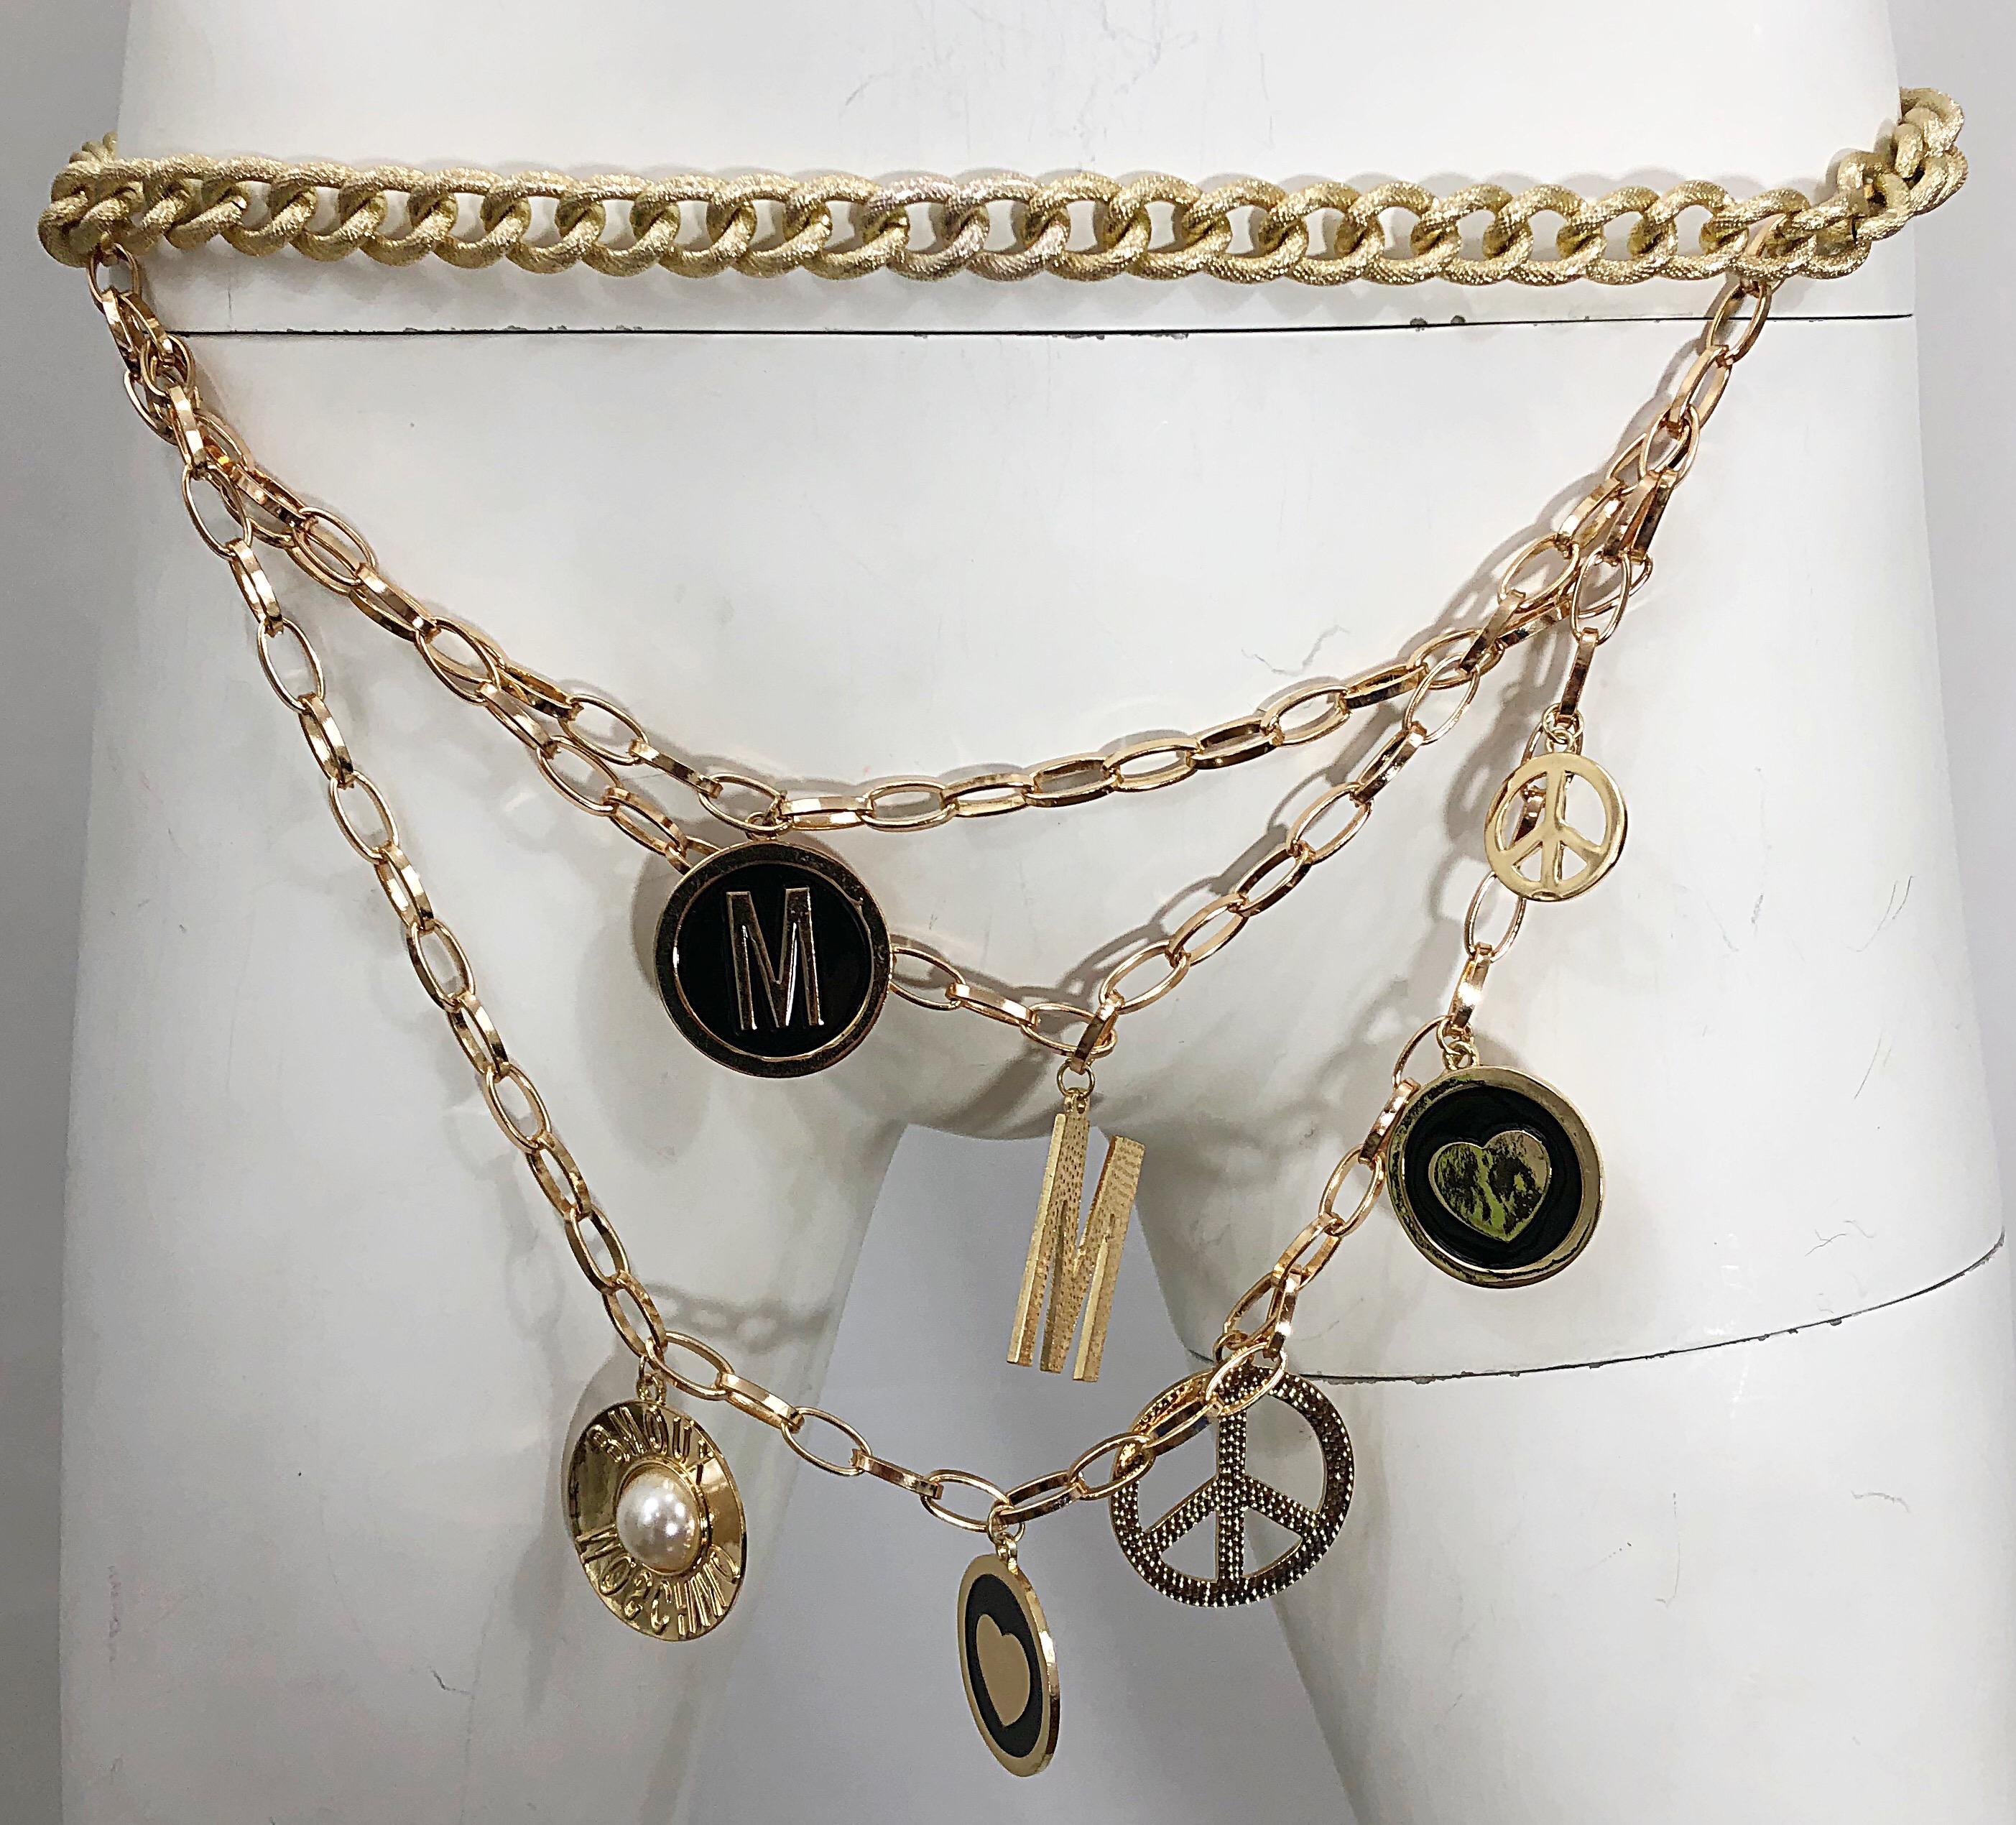 Iconic and chic vintage 90s MOSCHINO gold charm belt or necklace! Features a muted gold chain with gold tiers of chain. Large 'M' charm, with charms of hearts, peace signs. An additional charm has a pearl and Moschino spelt backwards. This rare gem